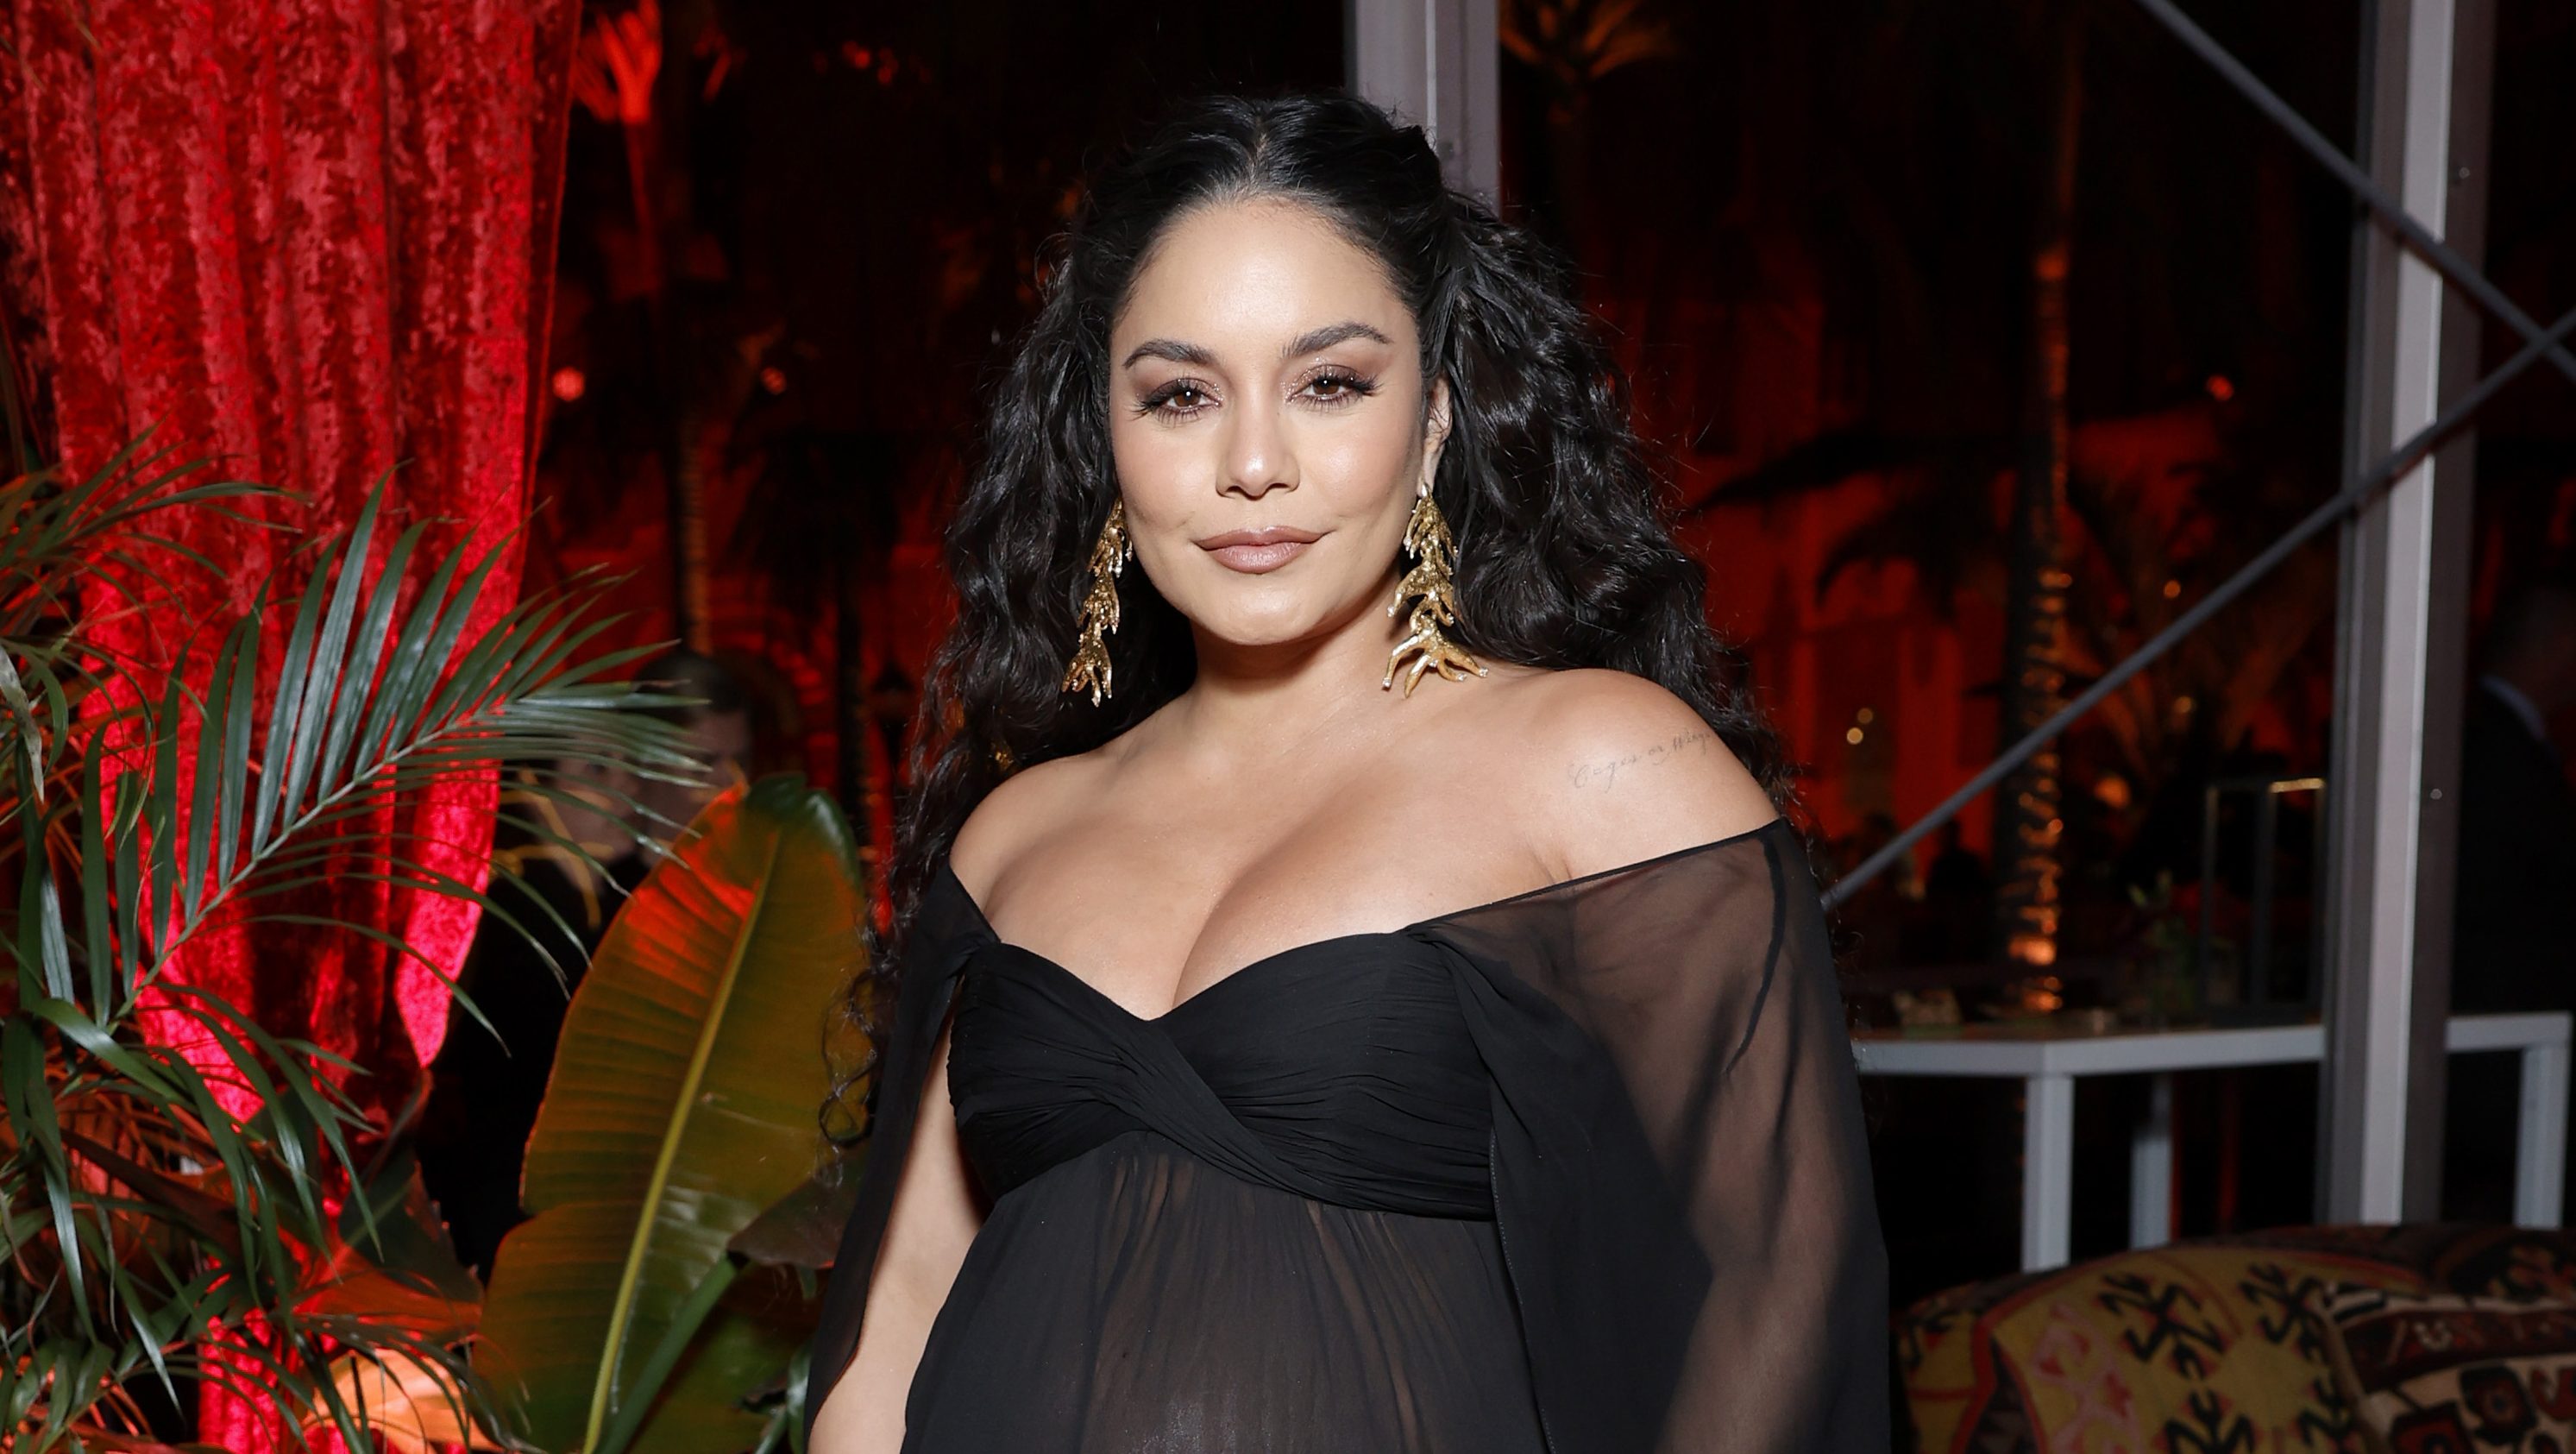 Vanessa Hudgens Confirms the Birth of Her Baby & Says Her ‘Family’s Privacy Was Disrespected’